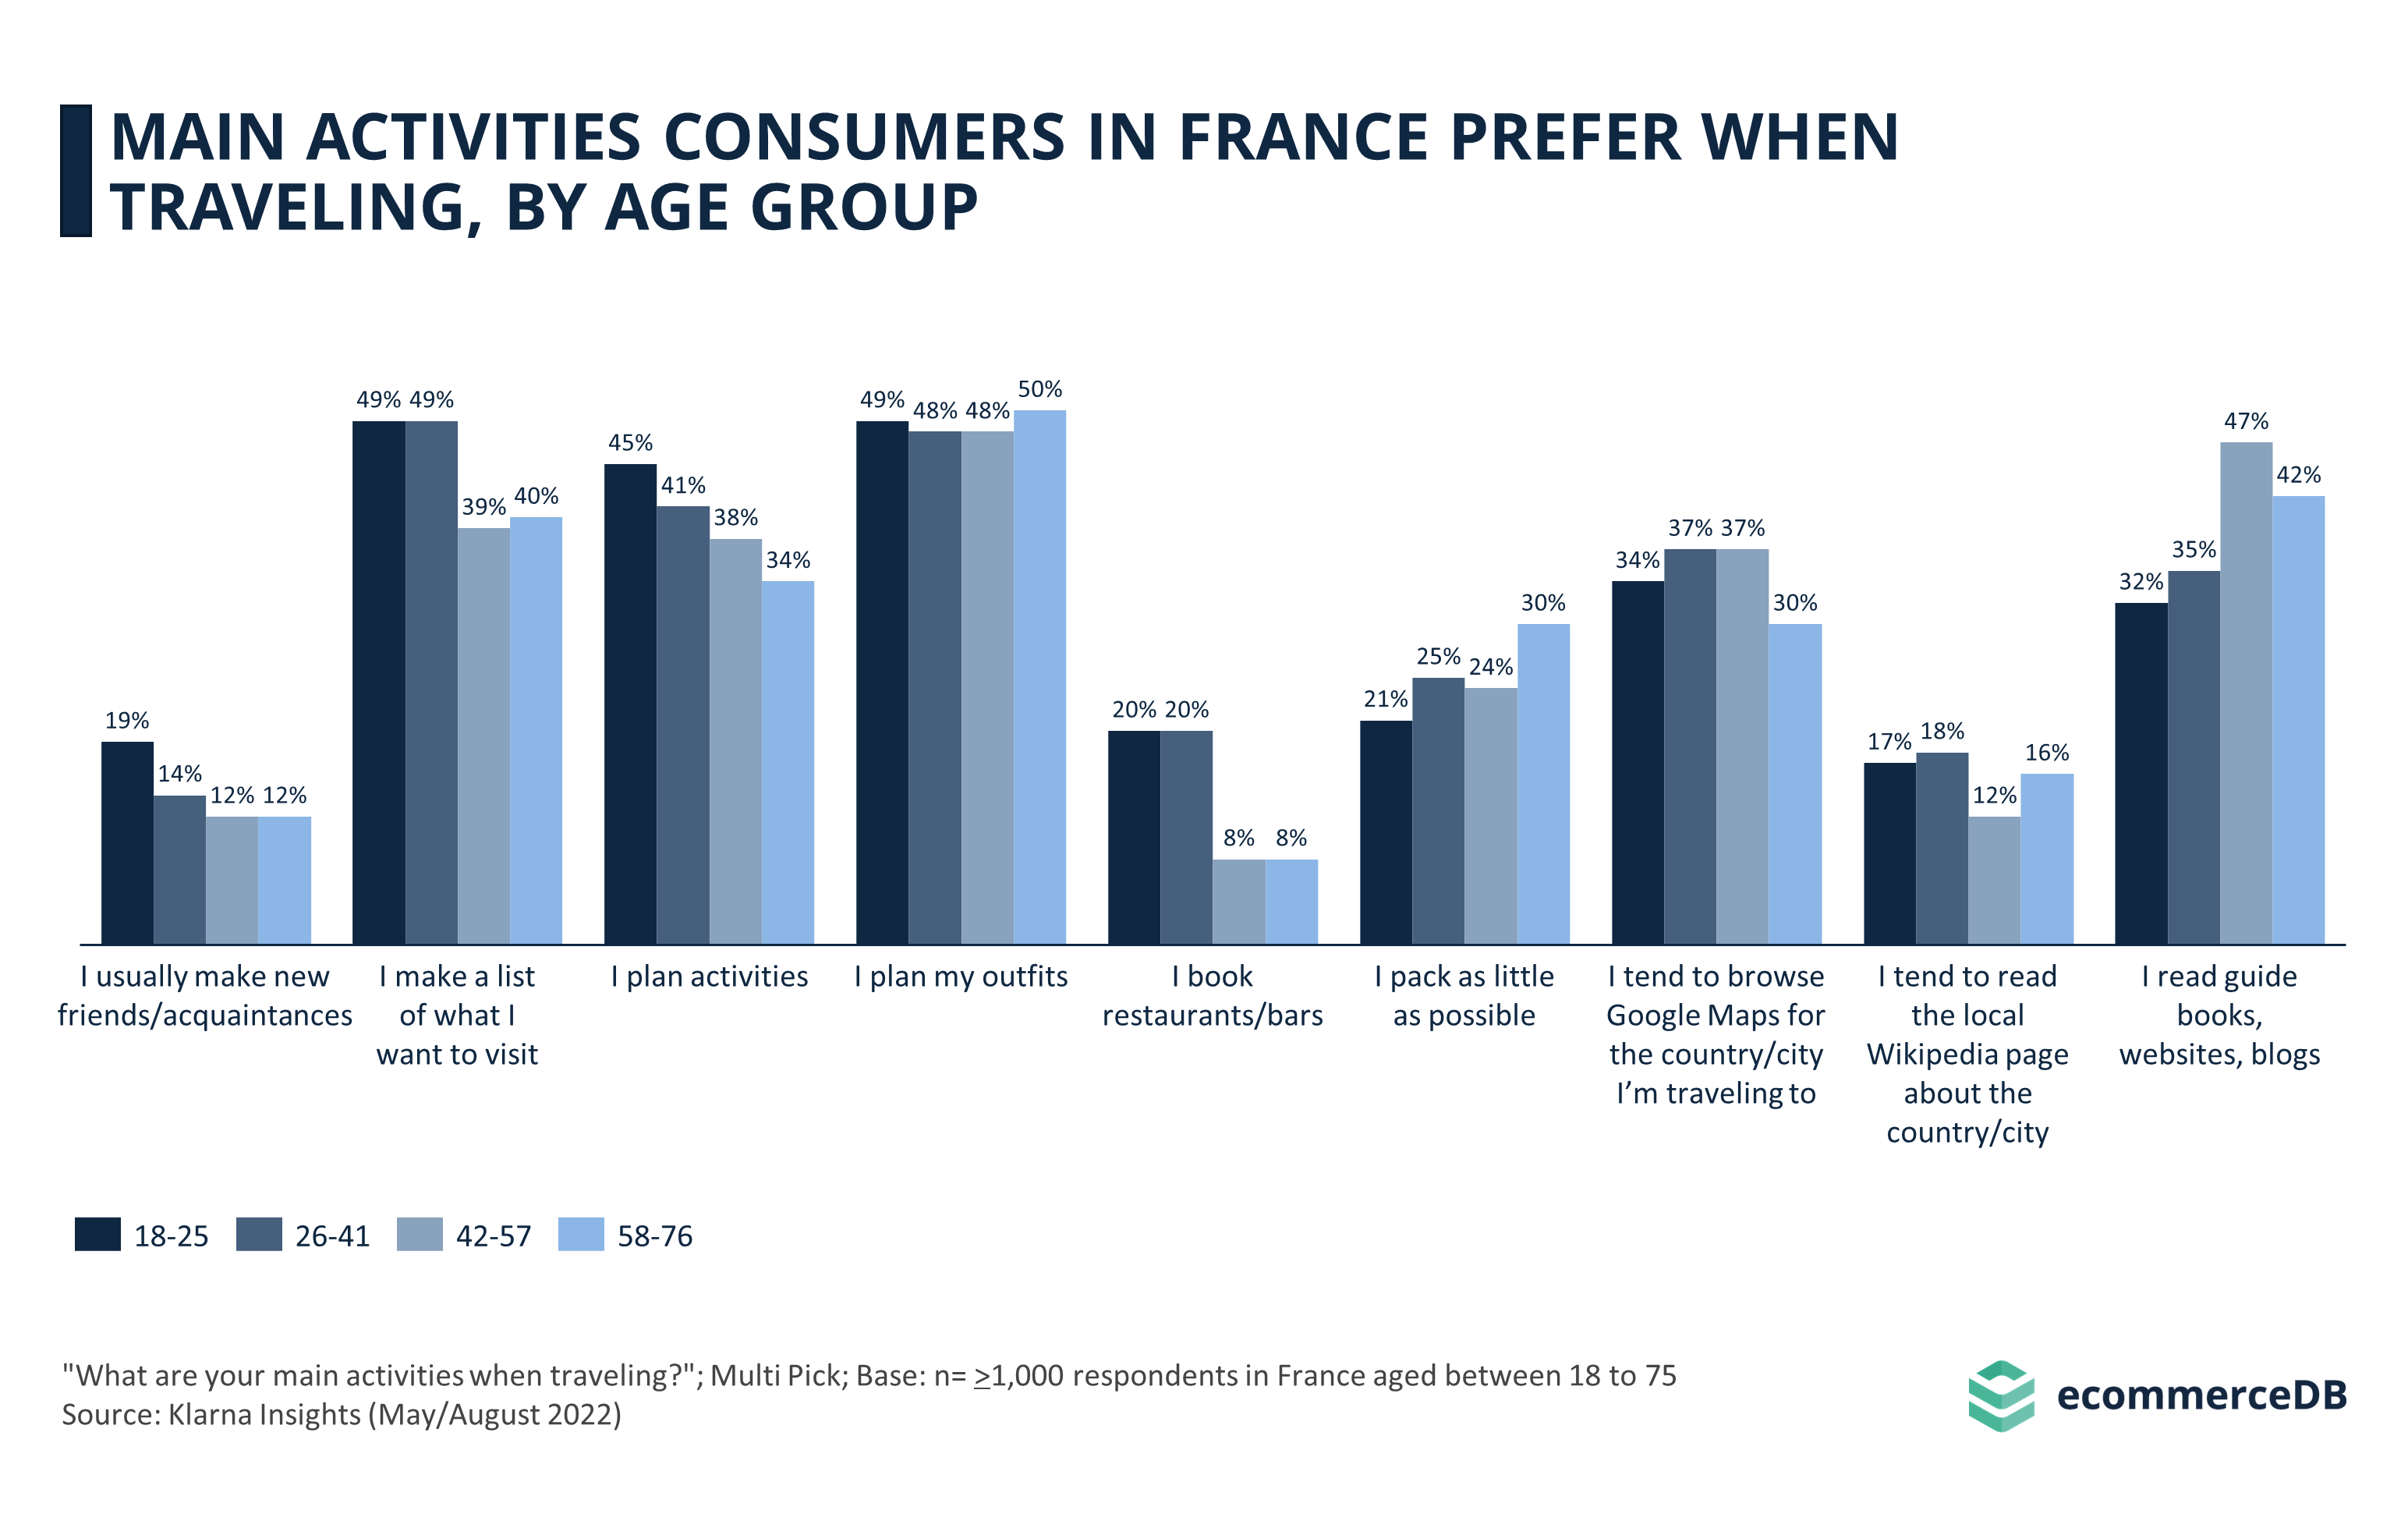 Main Activities When Traveling of Consumers in France by Age Group